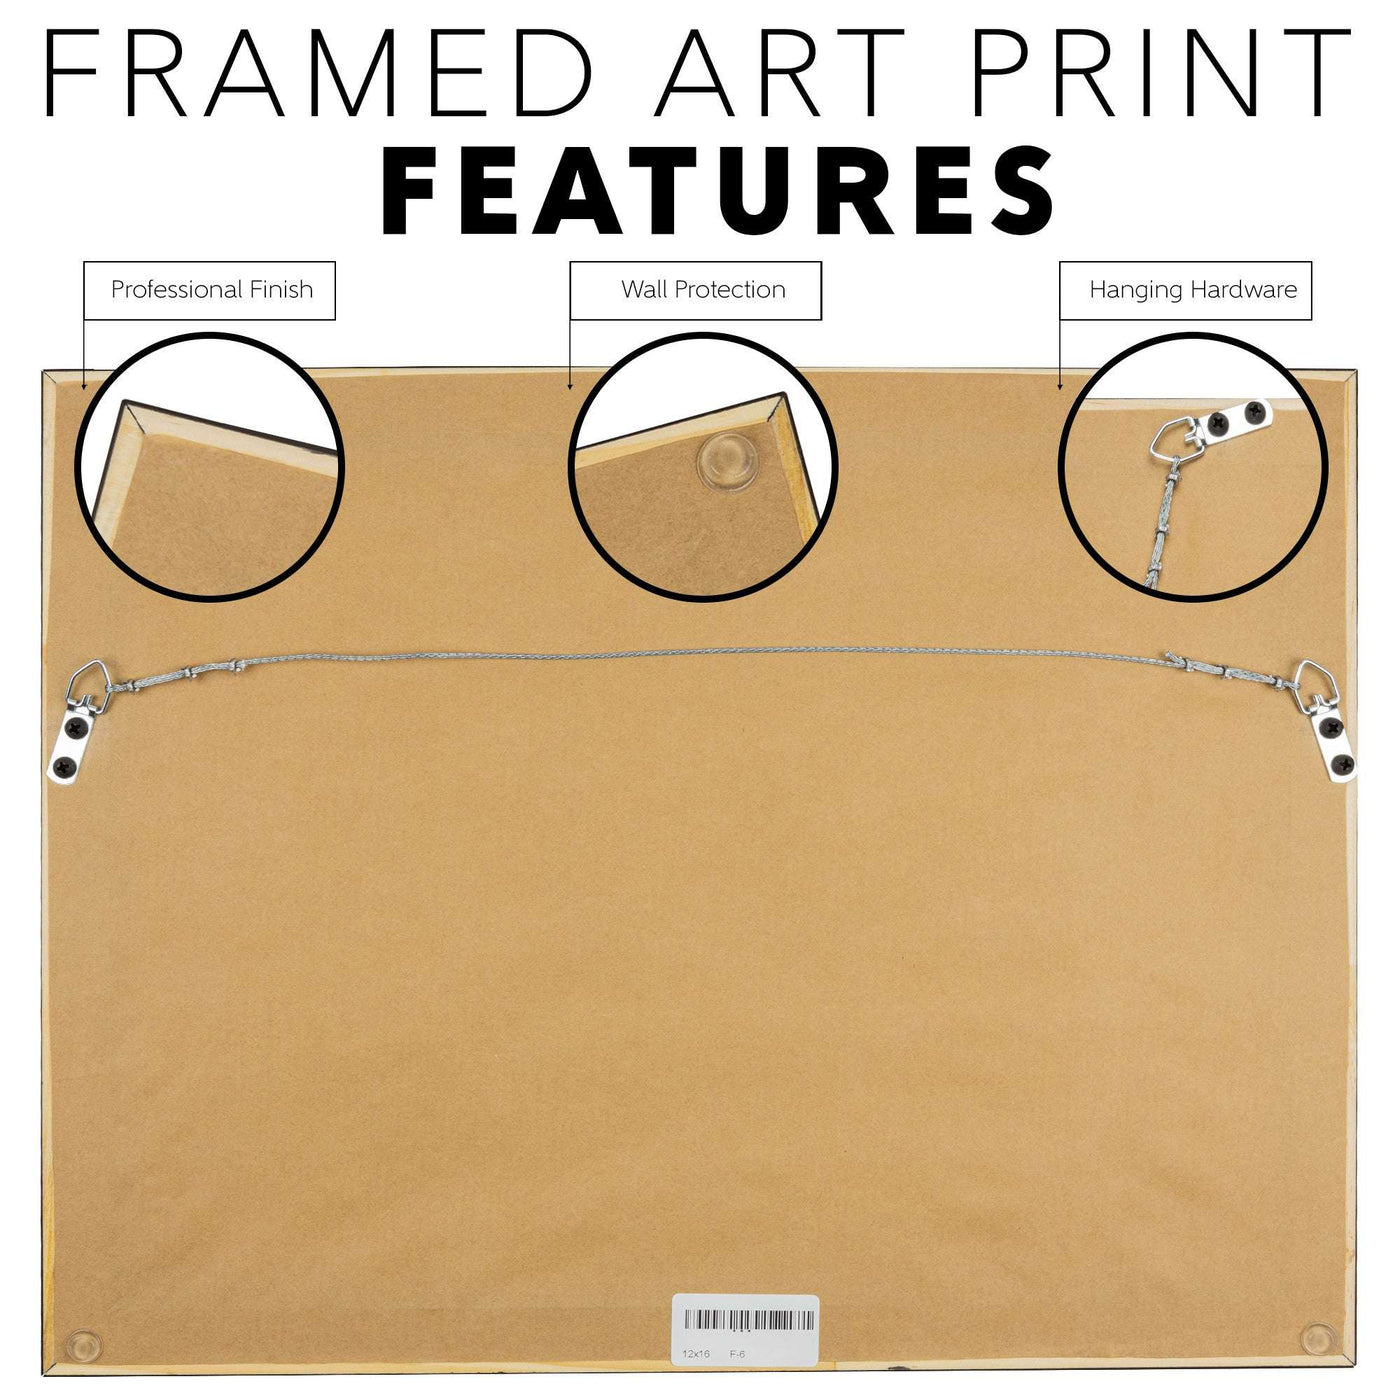 Illustration showcasing the back of a Framed Fox Art Print, highlighting its professional finish, wall protection, and included hanging hardware.